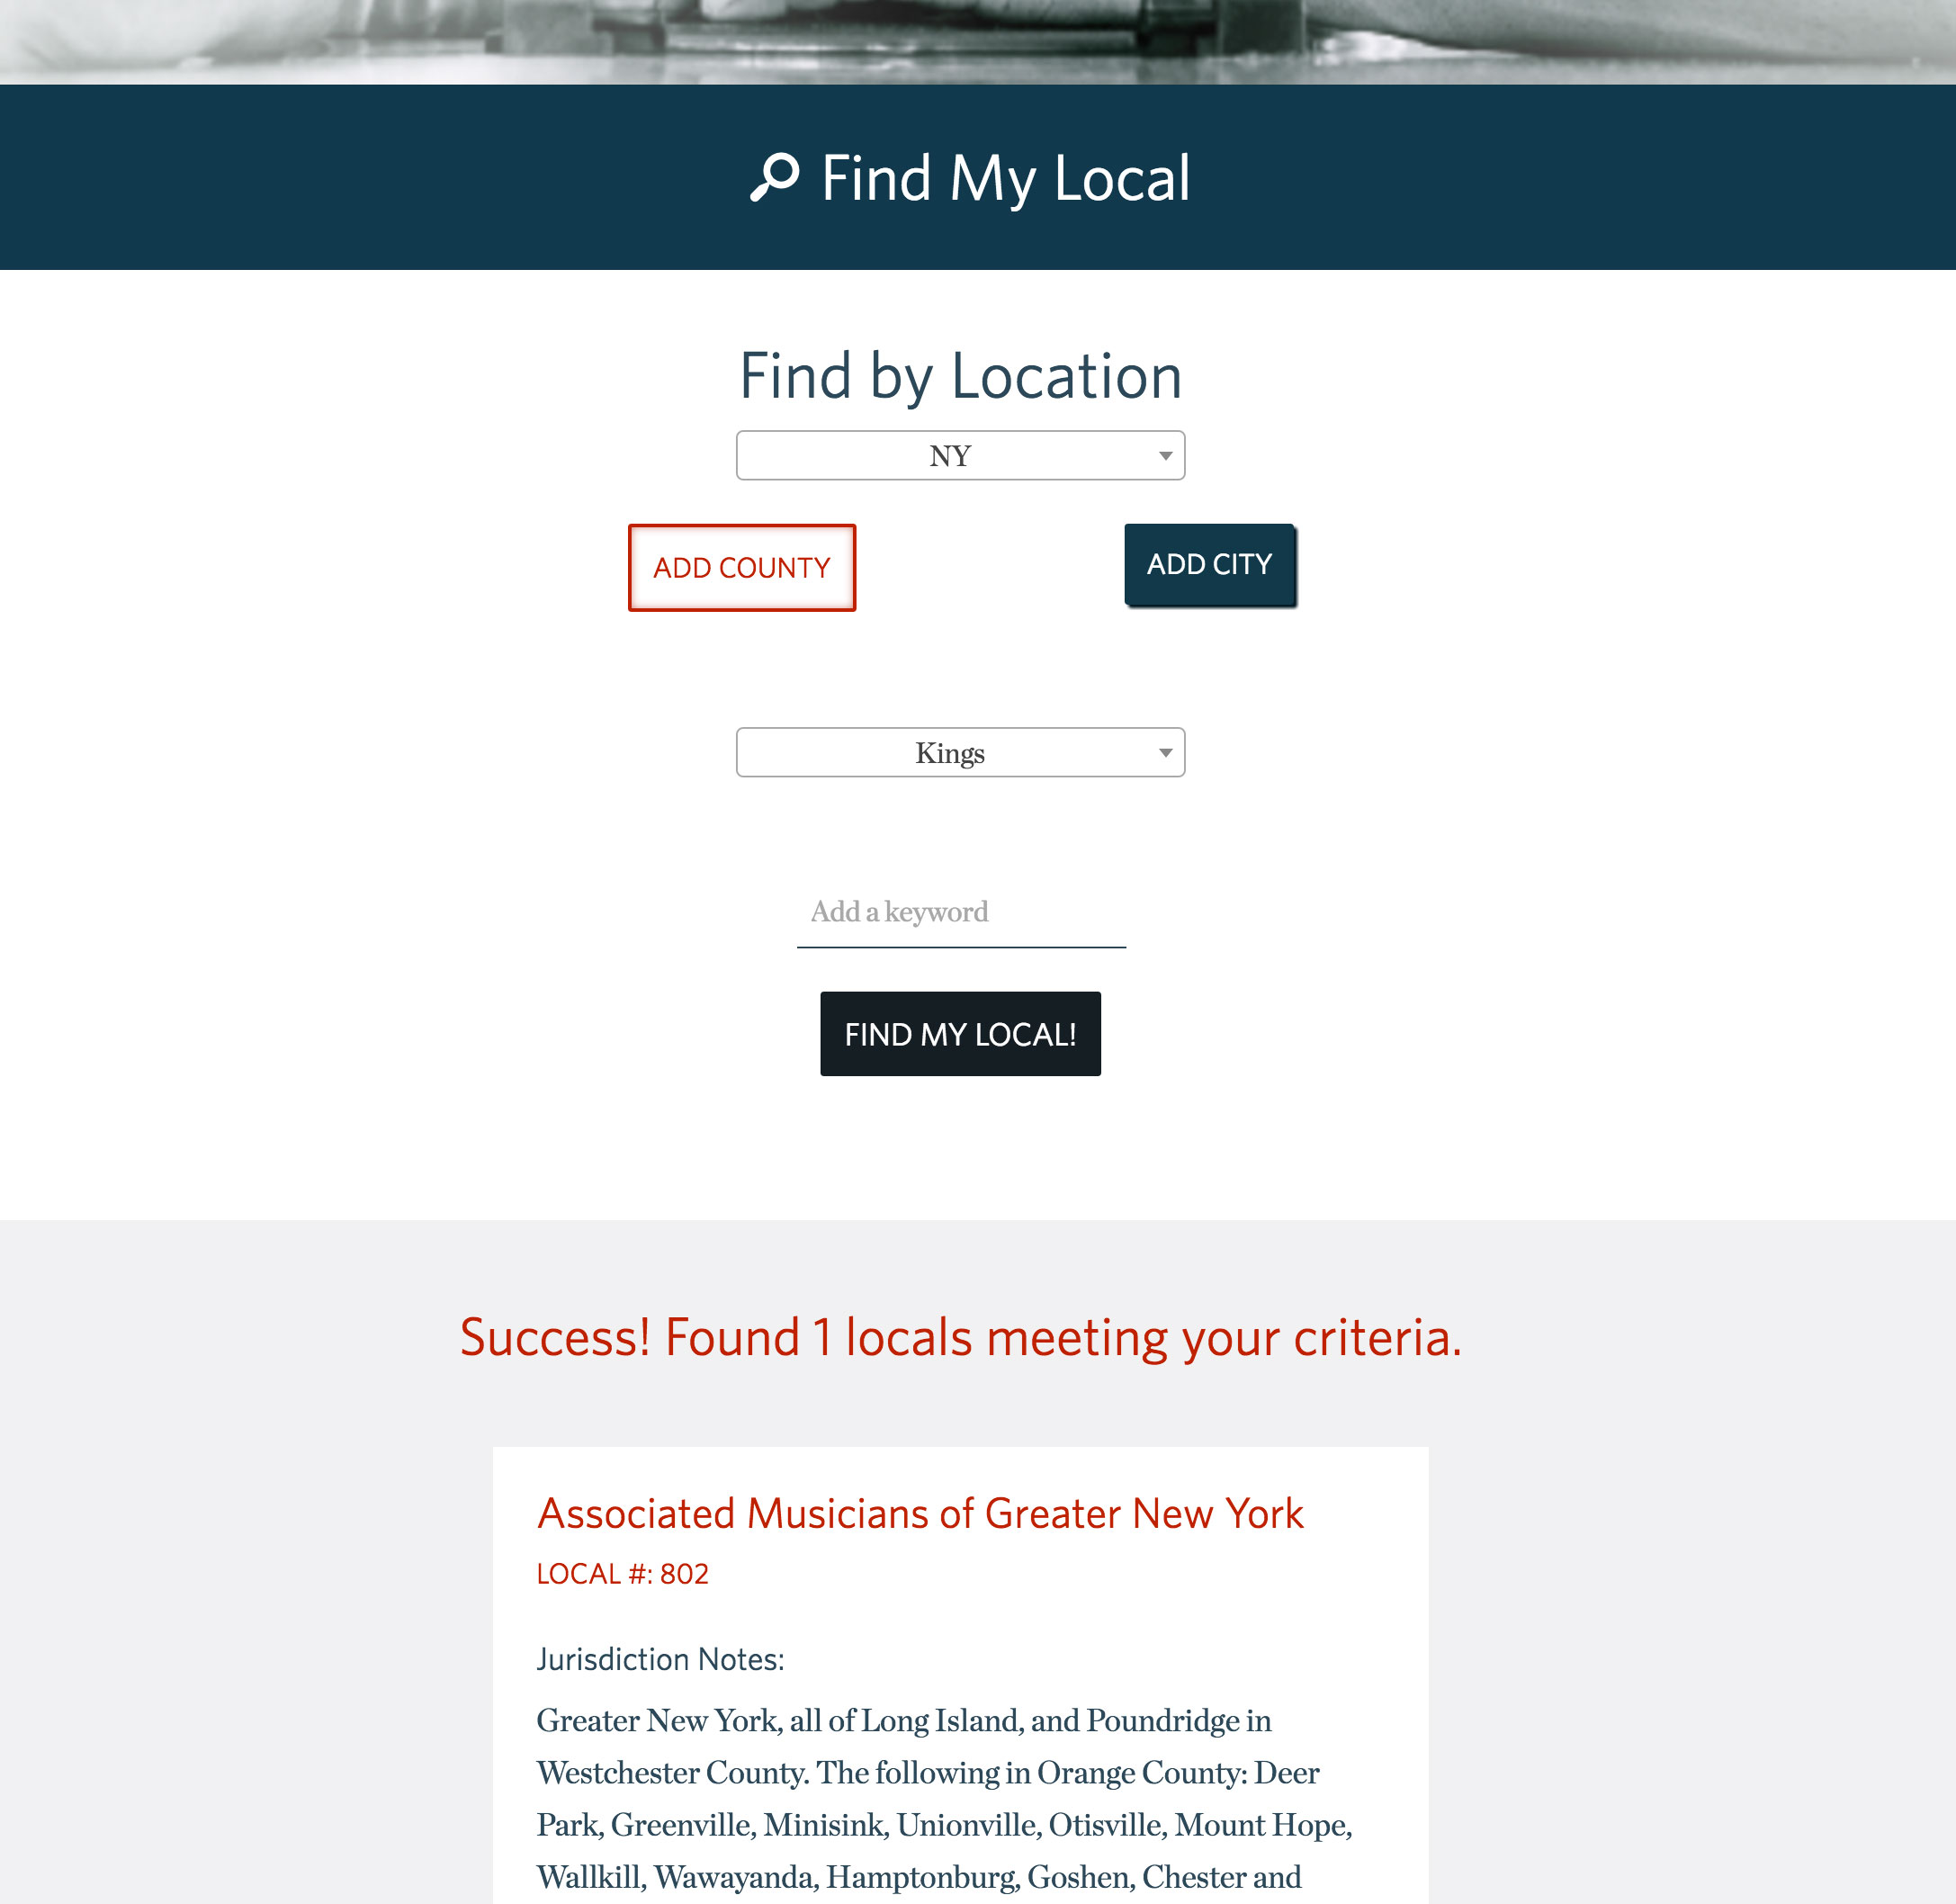 American Federation of Musicians (AFM): Find My Local Advanced Search